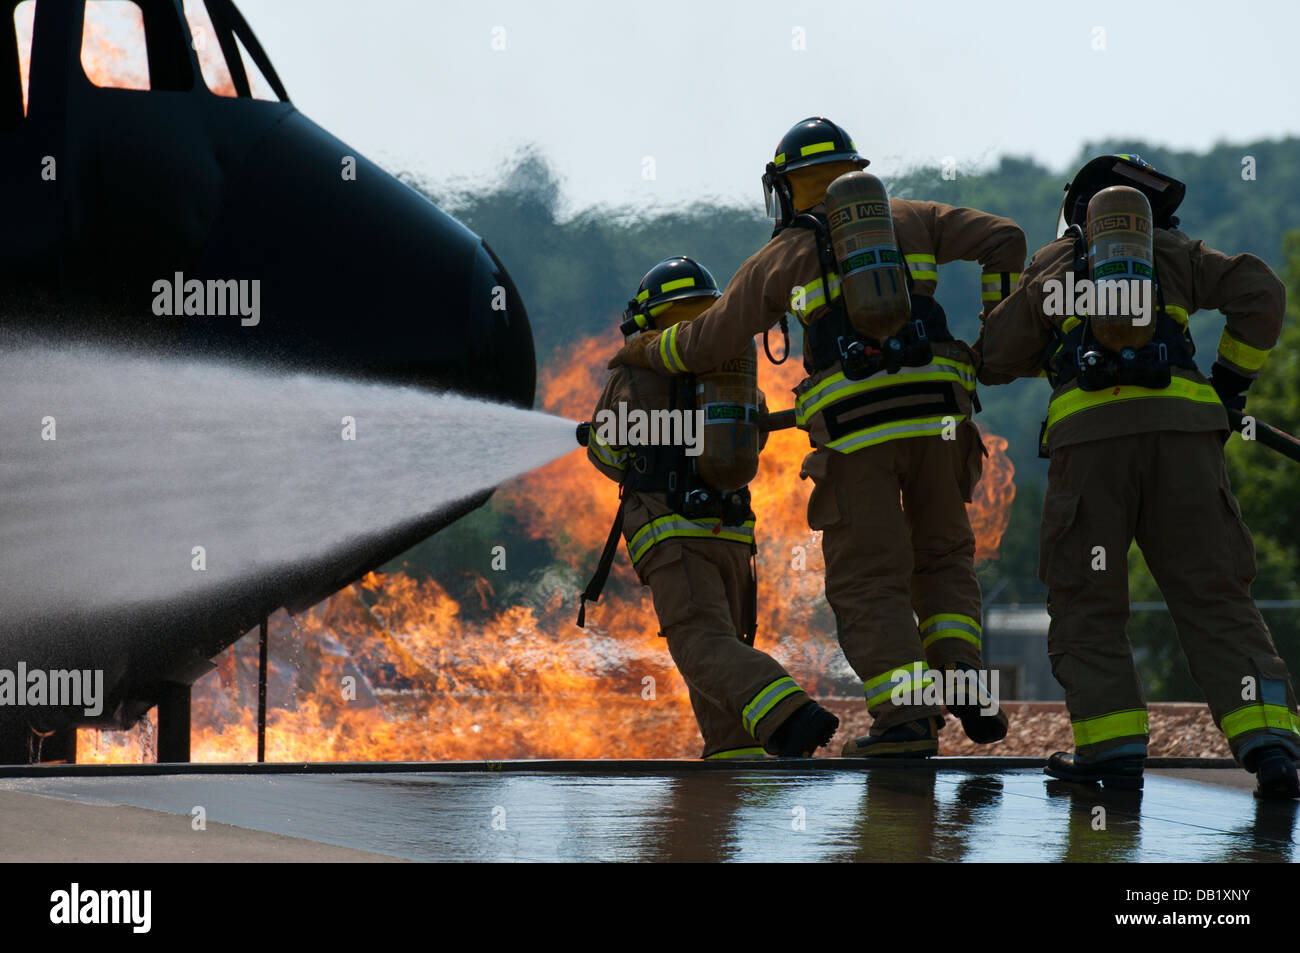 U.S. Army Reserve firefighters work to put out a fire at Volk Field Combat Readiness Training Center in Camp Douglas, Wis., July 18, 2013, during exercise Patriot 13. The Patriot exercise is a domestic operations scenario to assess the National Guard's ab Stock Photo